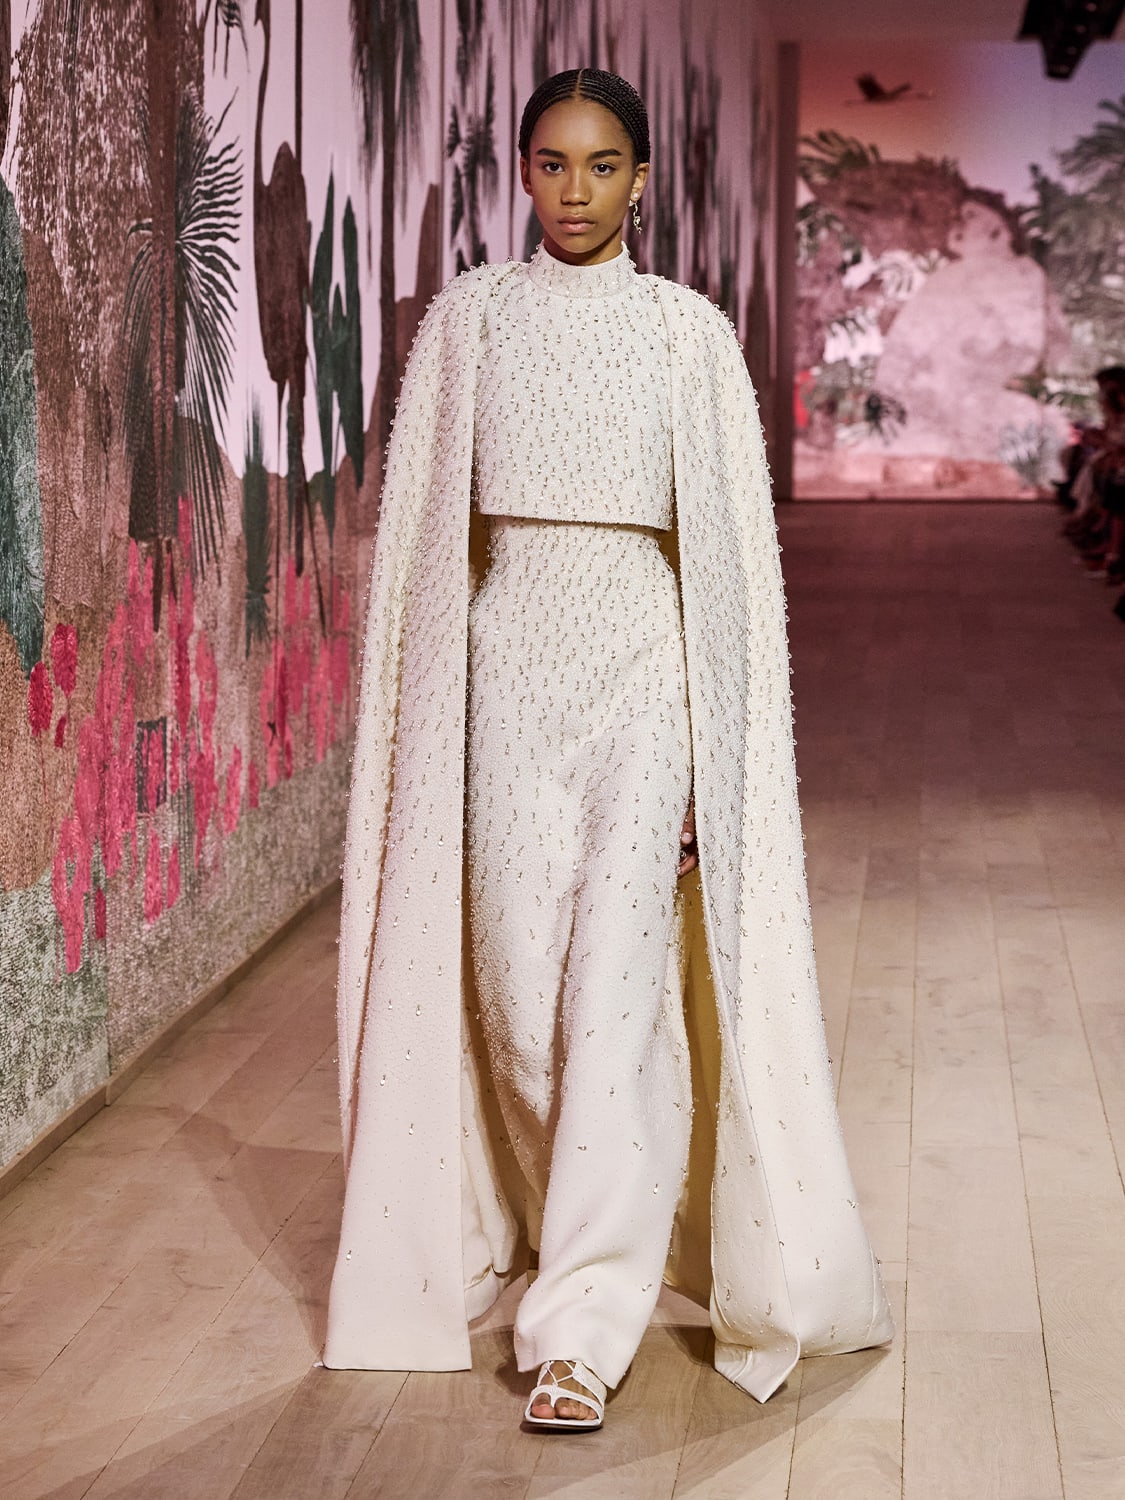 Animal parade: The whimsical appeal of Chanel's spring 2023 haute couture  looks - CNA Luxury